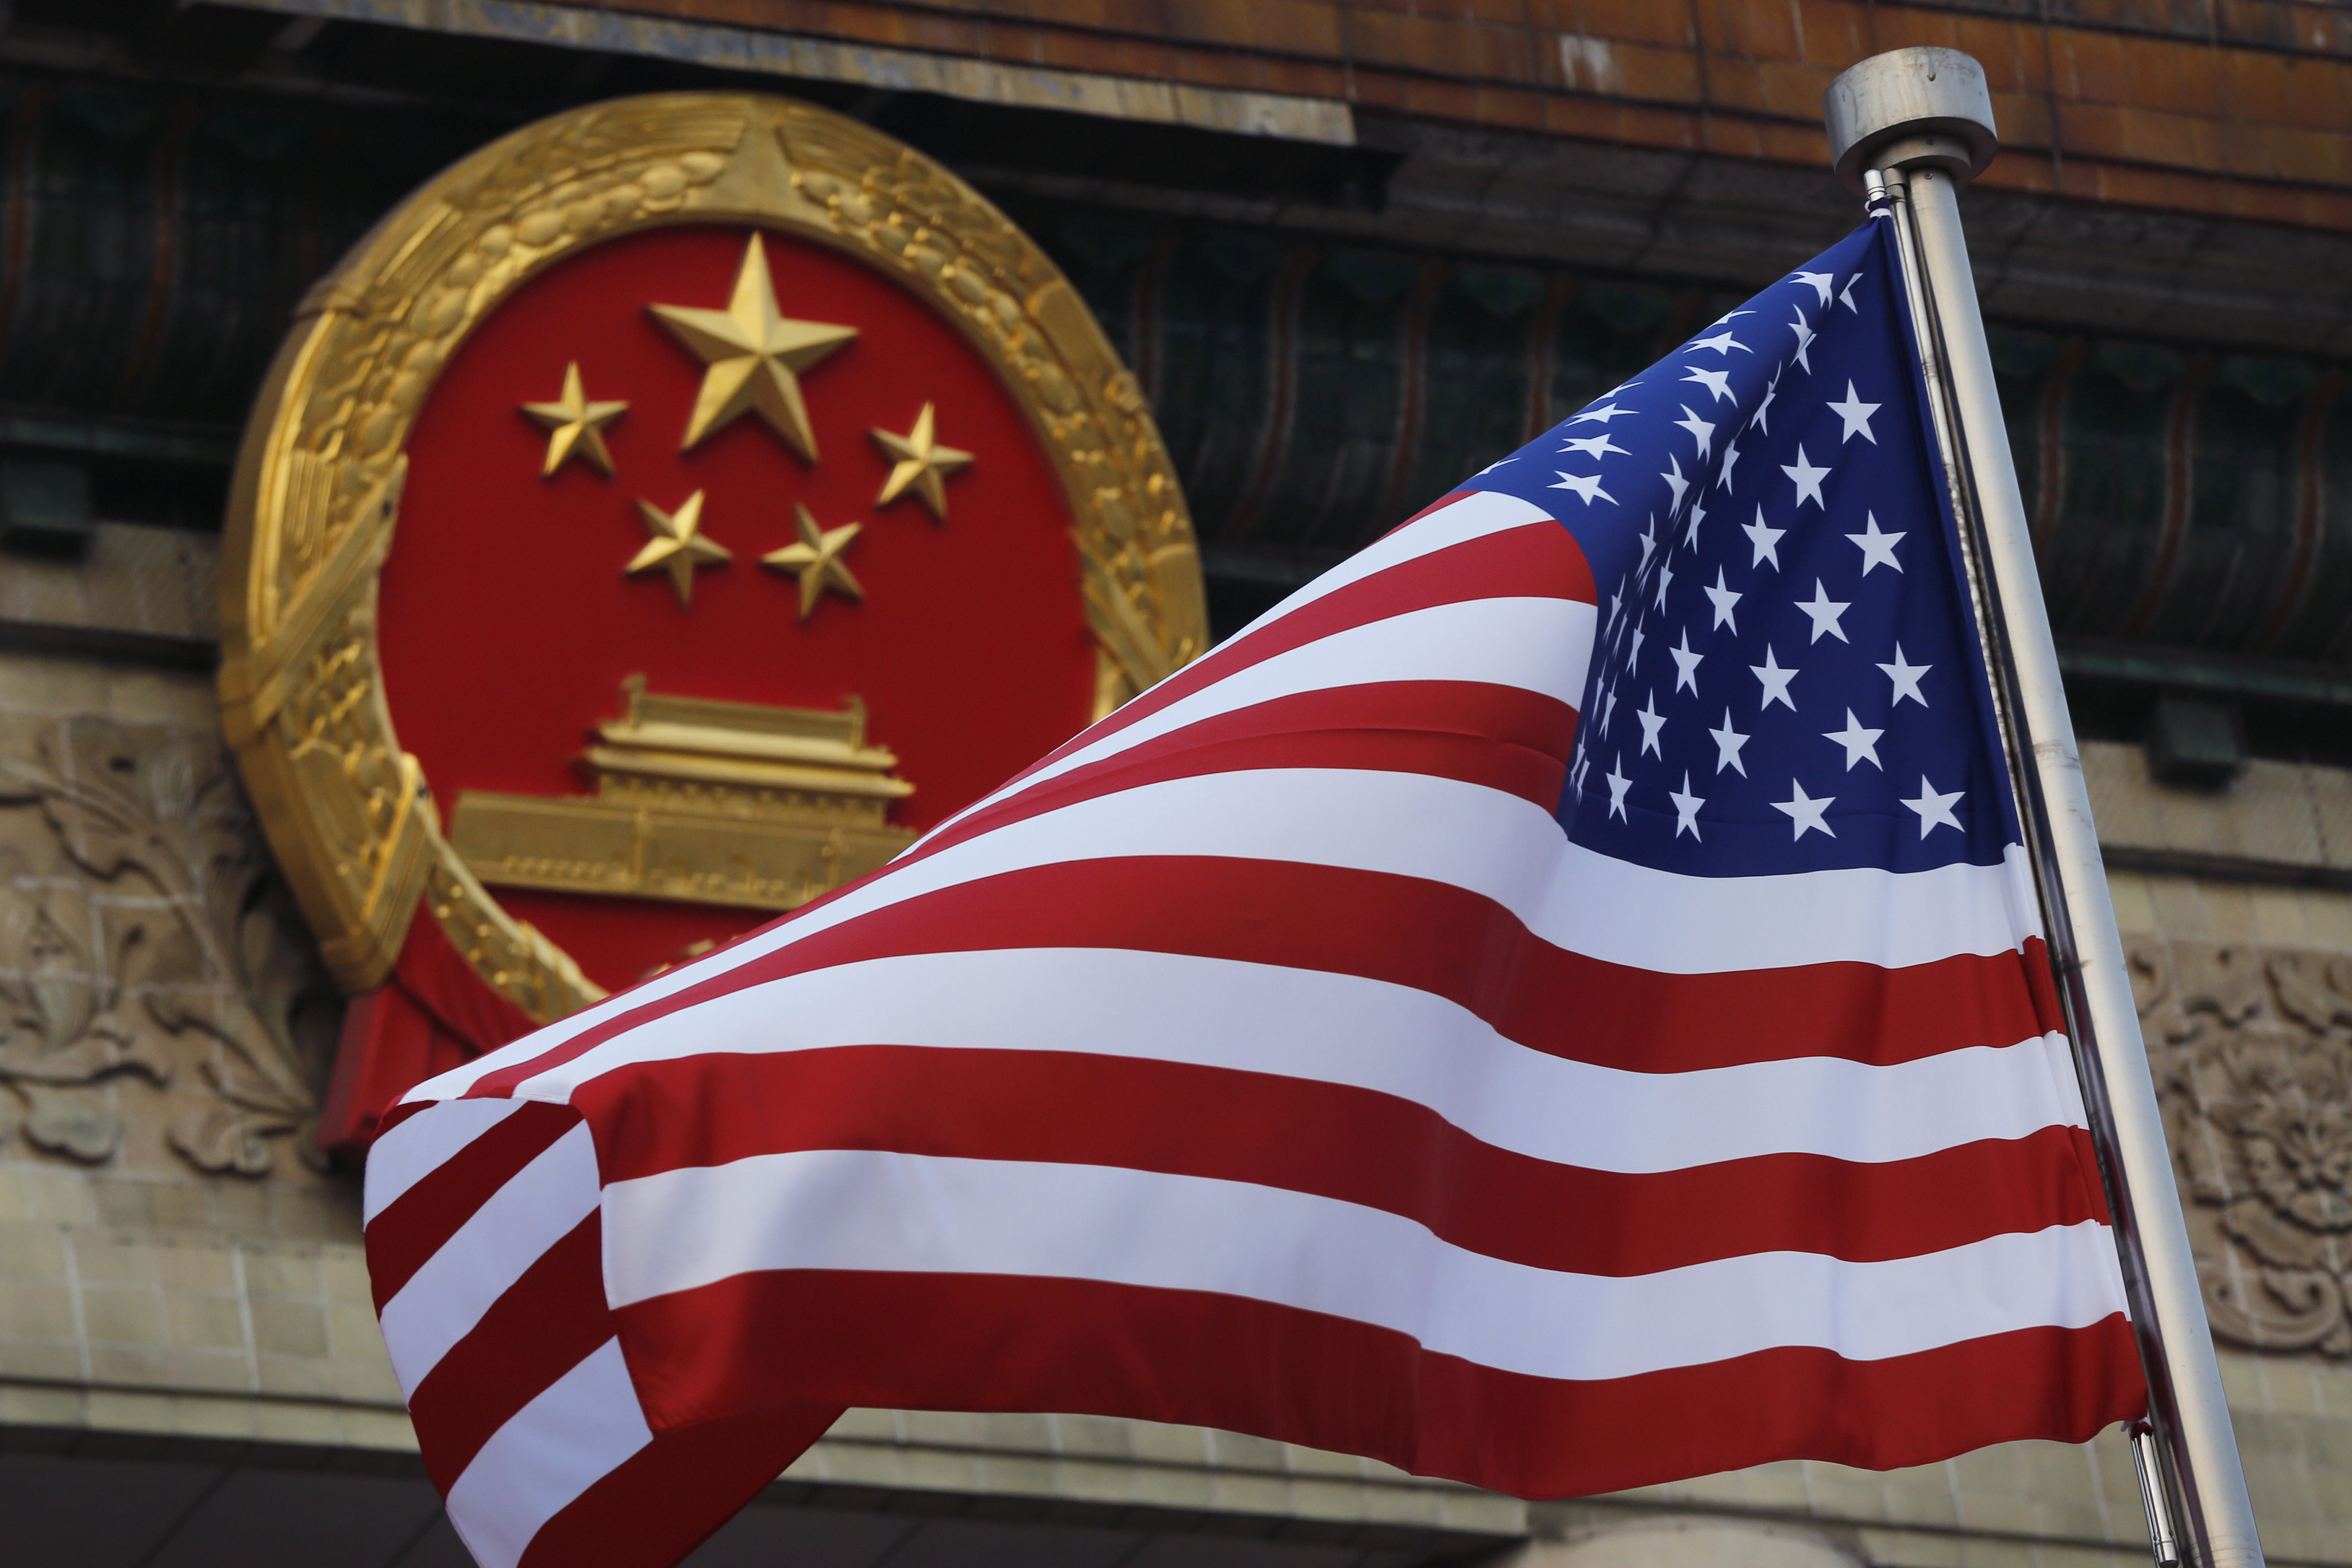 Beijing says Washington’s decision to shoot down a suspected Chinese spy balloon was an overreaction. Photo: AP